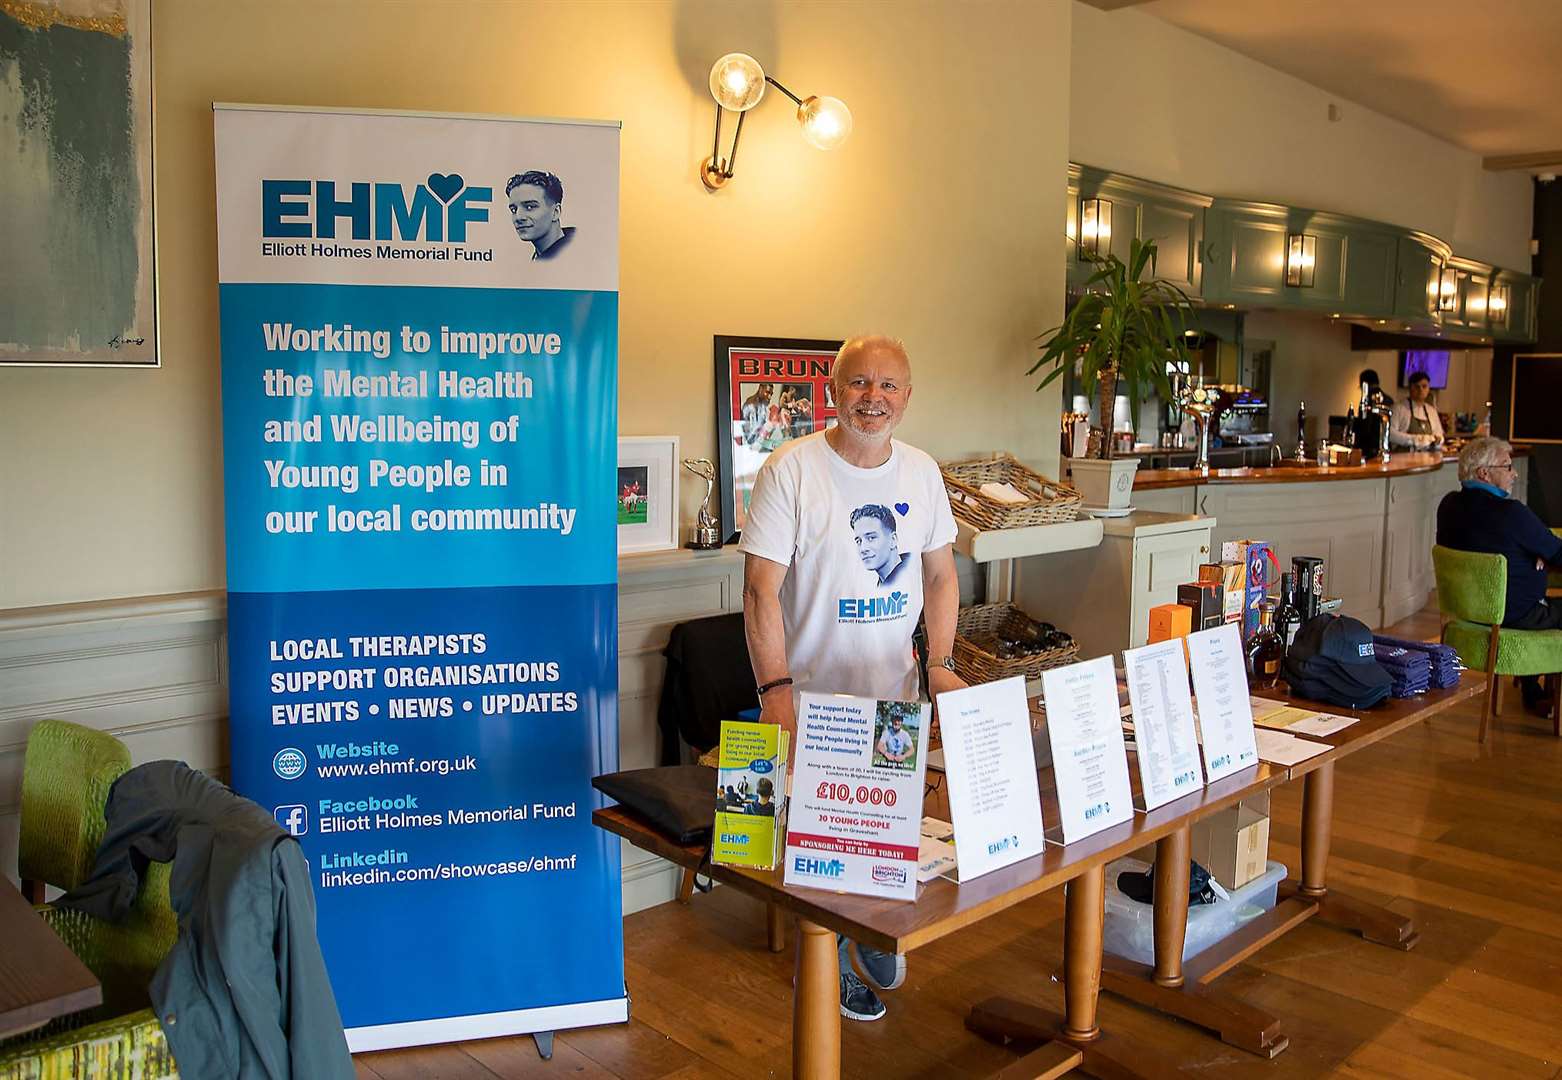 Peter Scutts, pictured, is raising money in memory of step-son Elliott Holmes to fund private counselling sessions for youngsters struggling with their mental health. Photo: EHMF